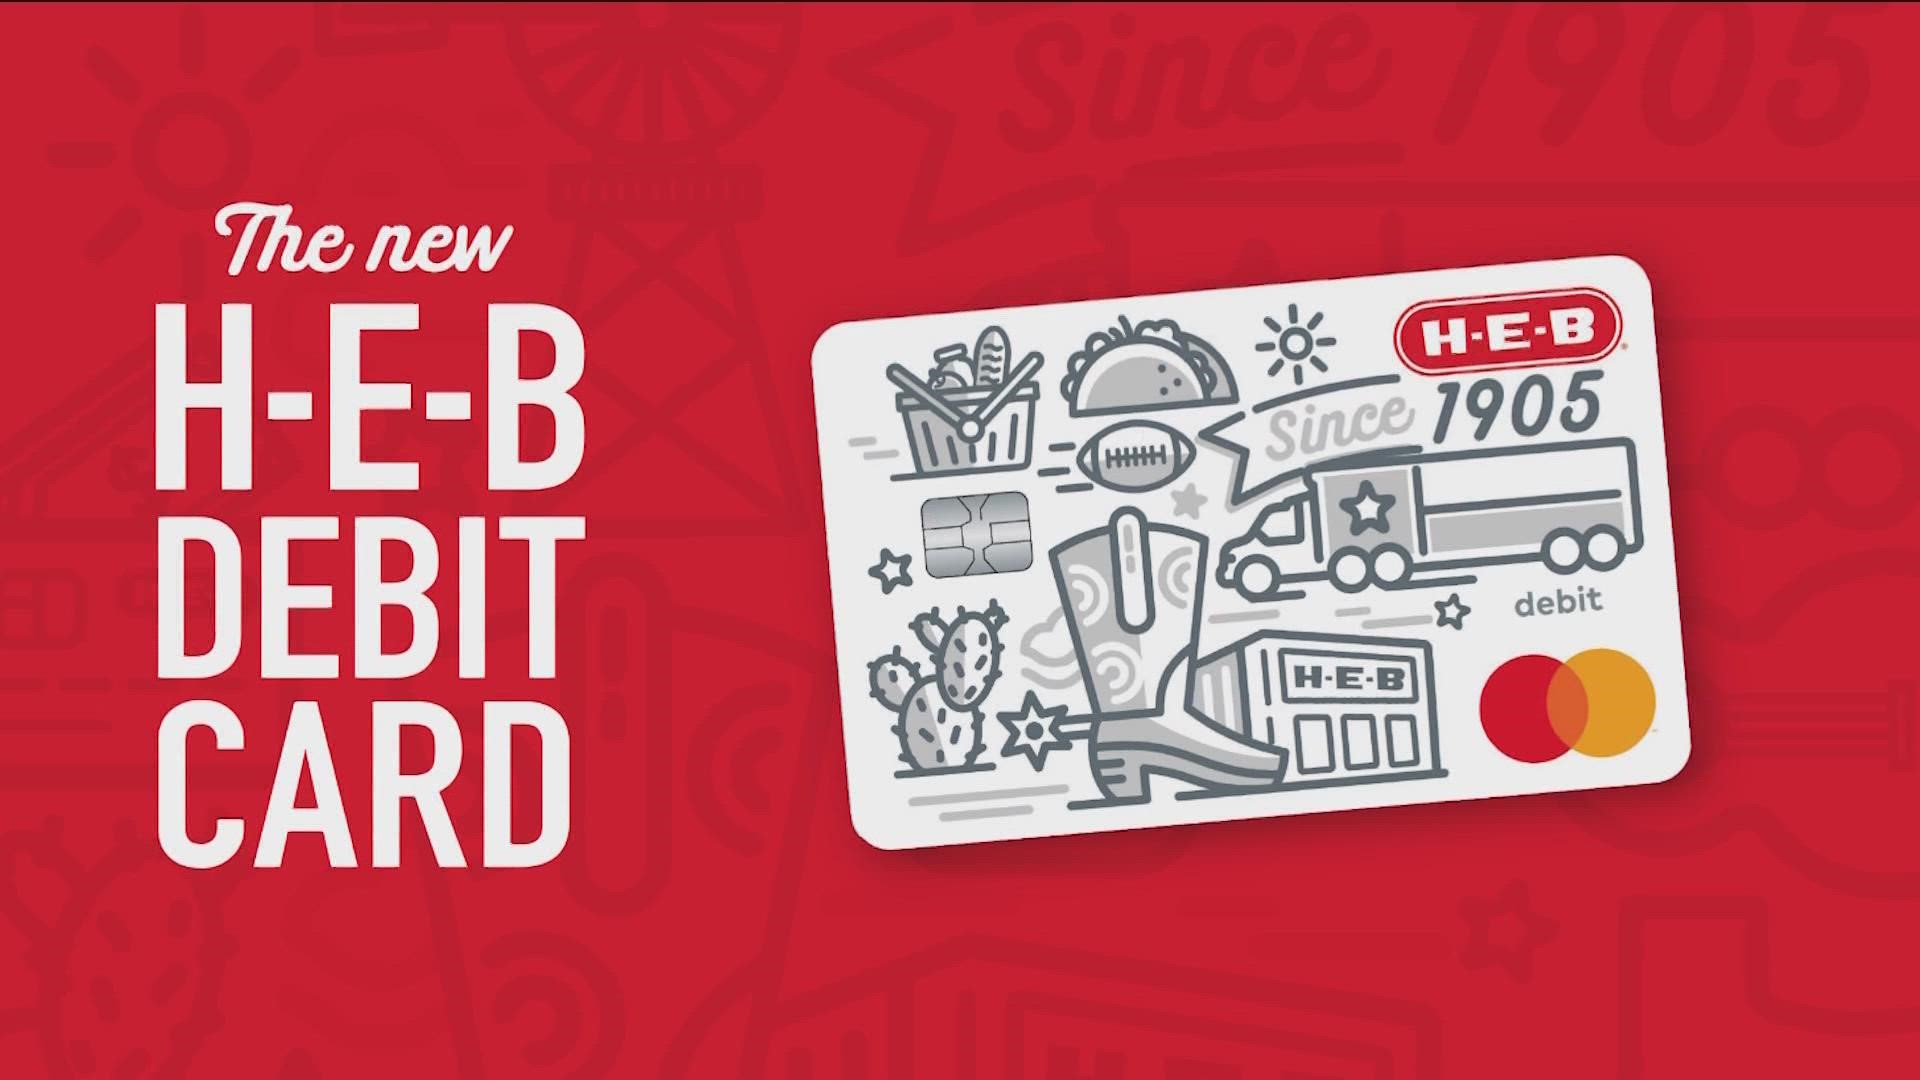 H-E-B is now offering a debit account program that gives customers 5% cash back on the purchase of qualifying H-E-B products.